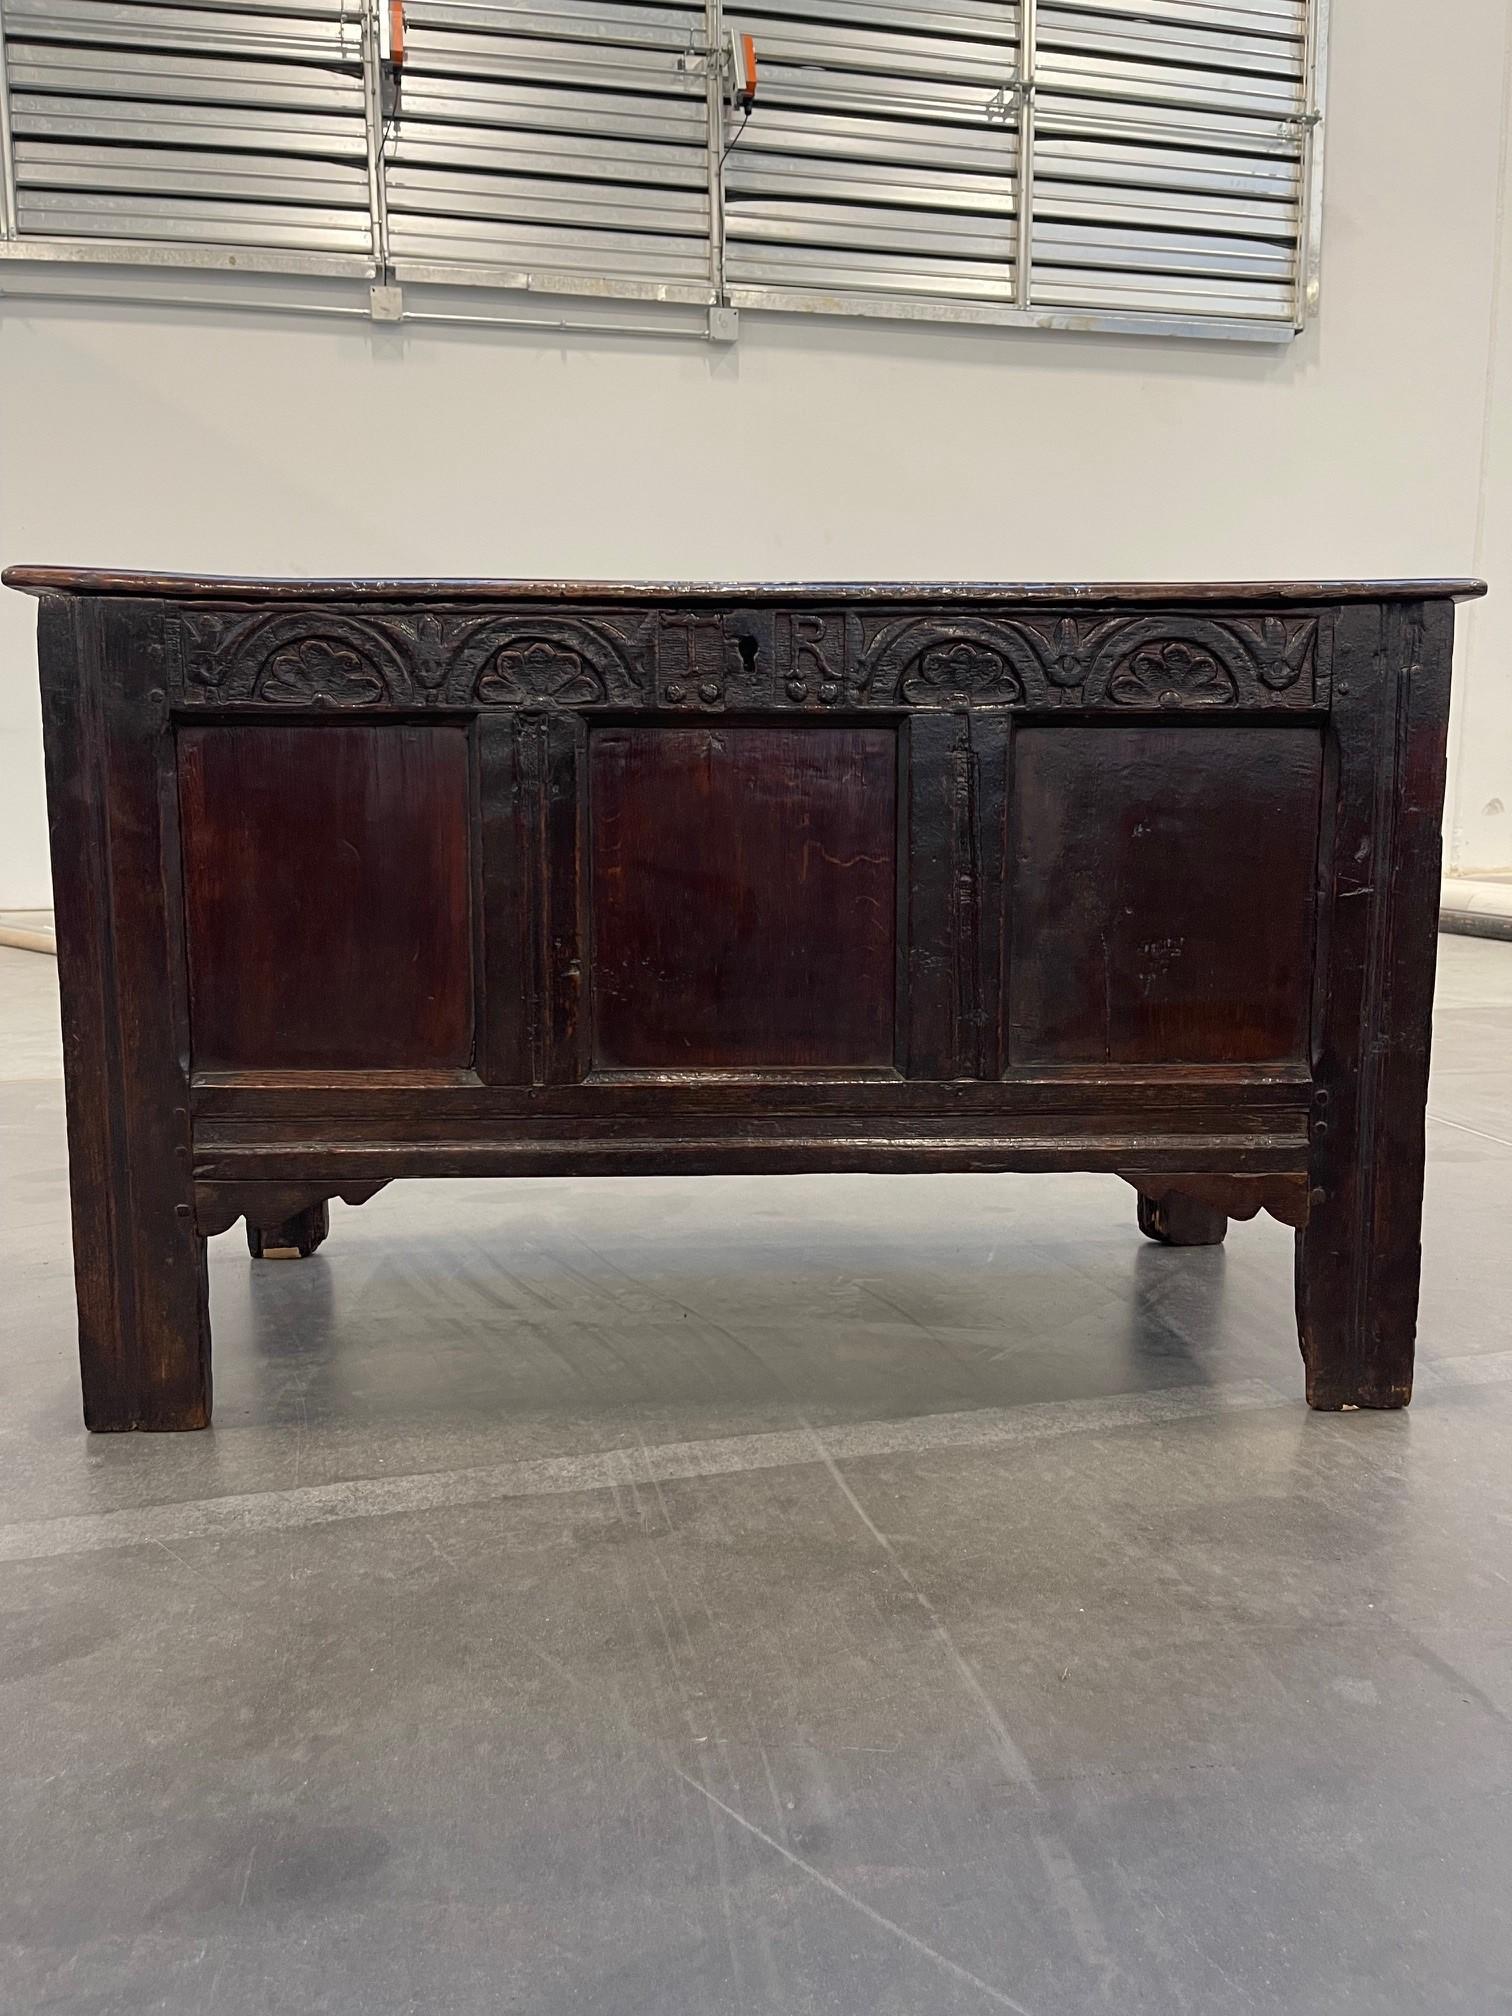 A wonderful Charles II Carved Oak Coffer Circa 1670, with three front plain panels sitting below a carved foliage freeze. Initialed TR on each side of center lock with a two plank hinged lid, (hinges appear to be original) sitting on stile feet. The